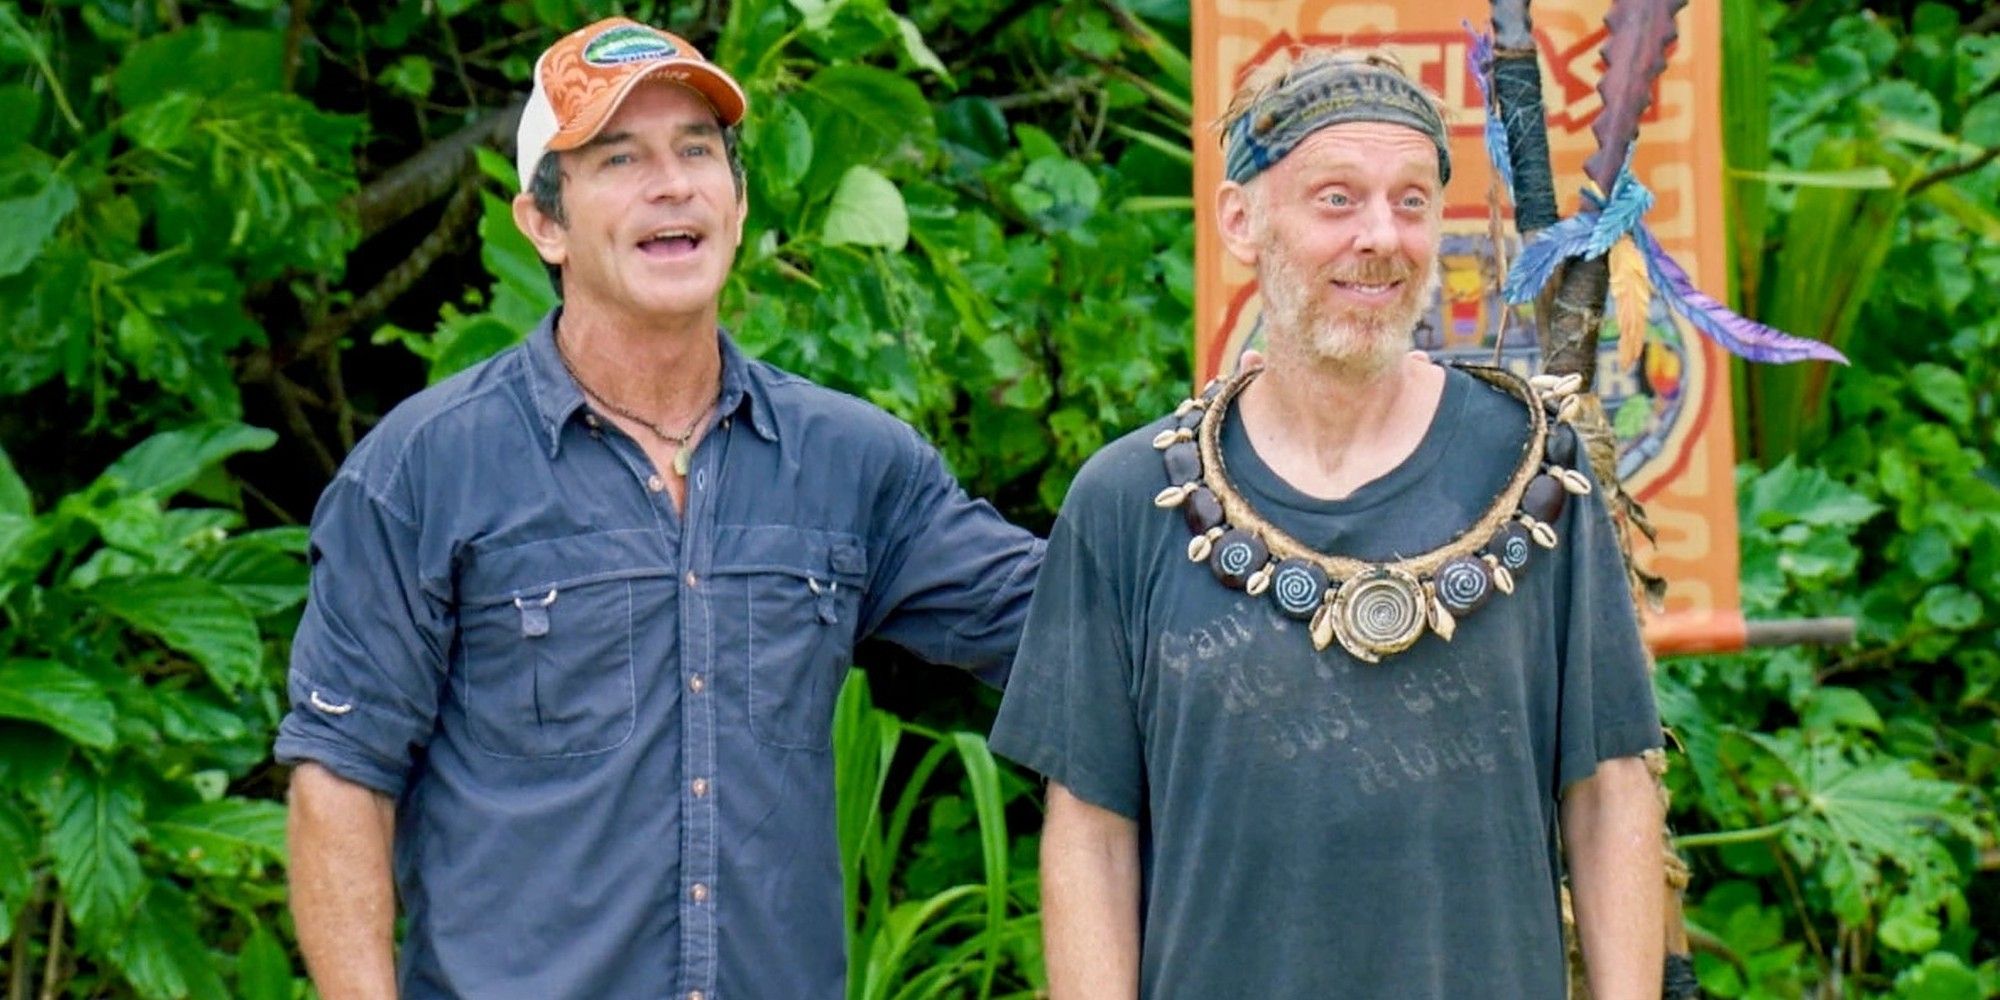 Mike White and Jeff Probst on Survivor